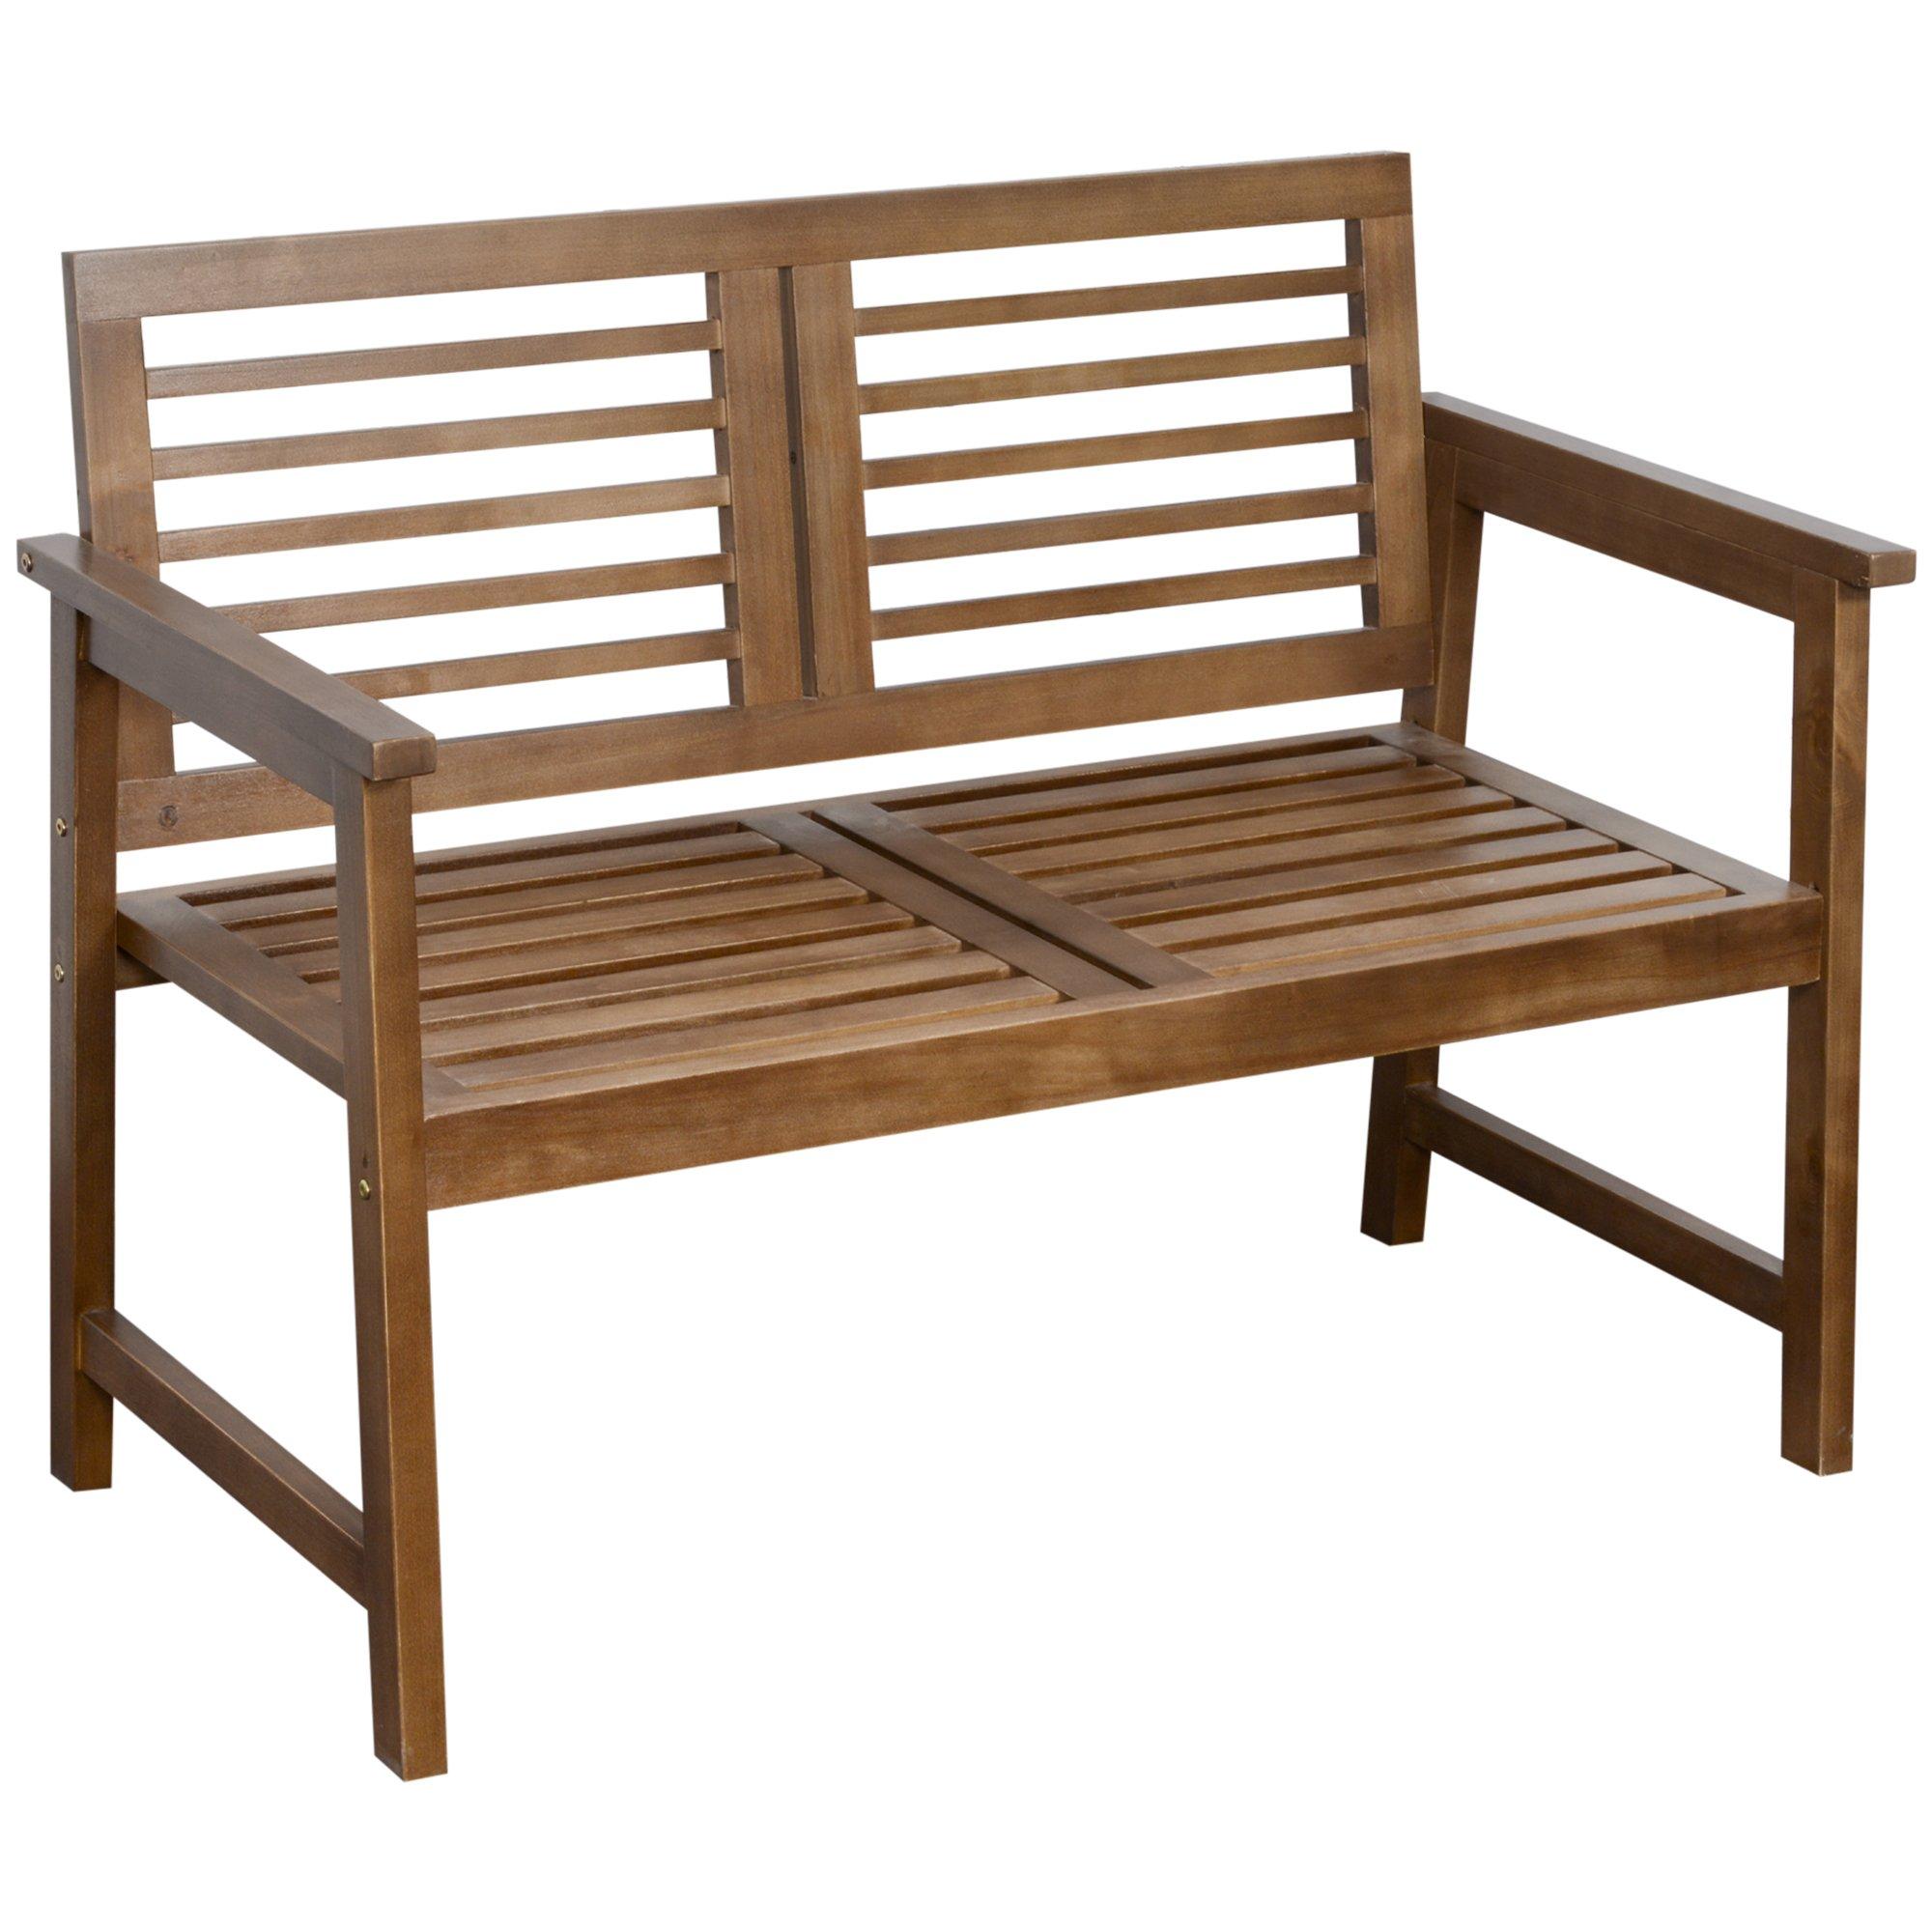 2-Seater Wooden Garden Bench with Backrest and Armrest for Yard